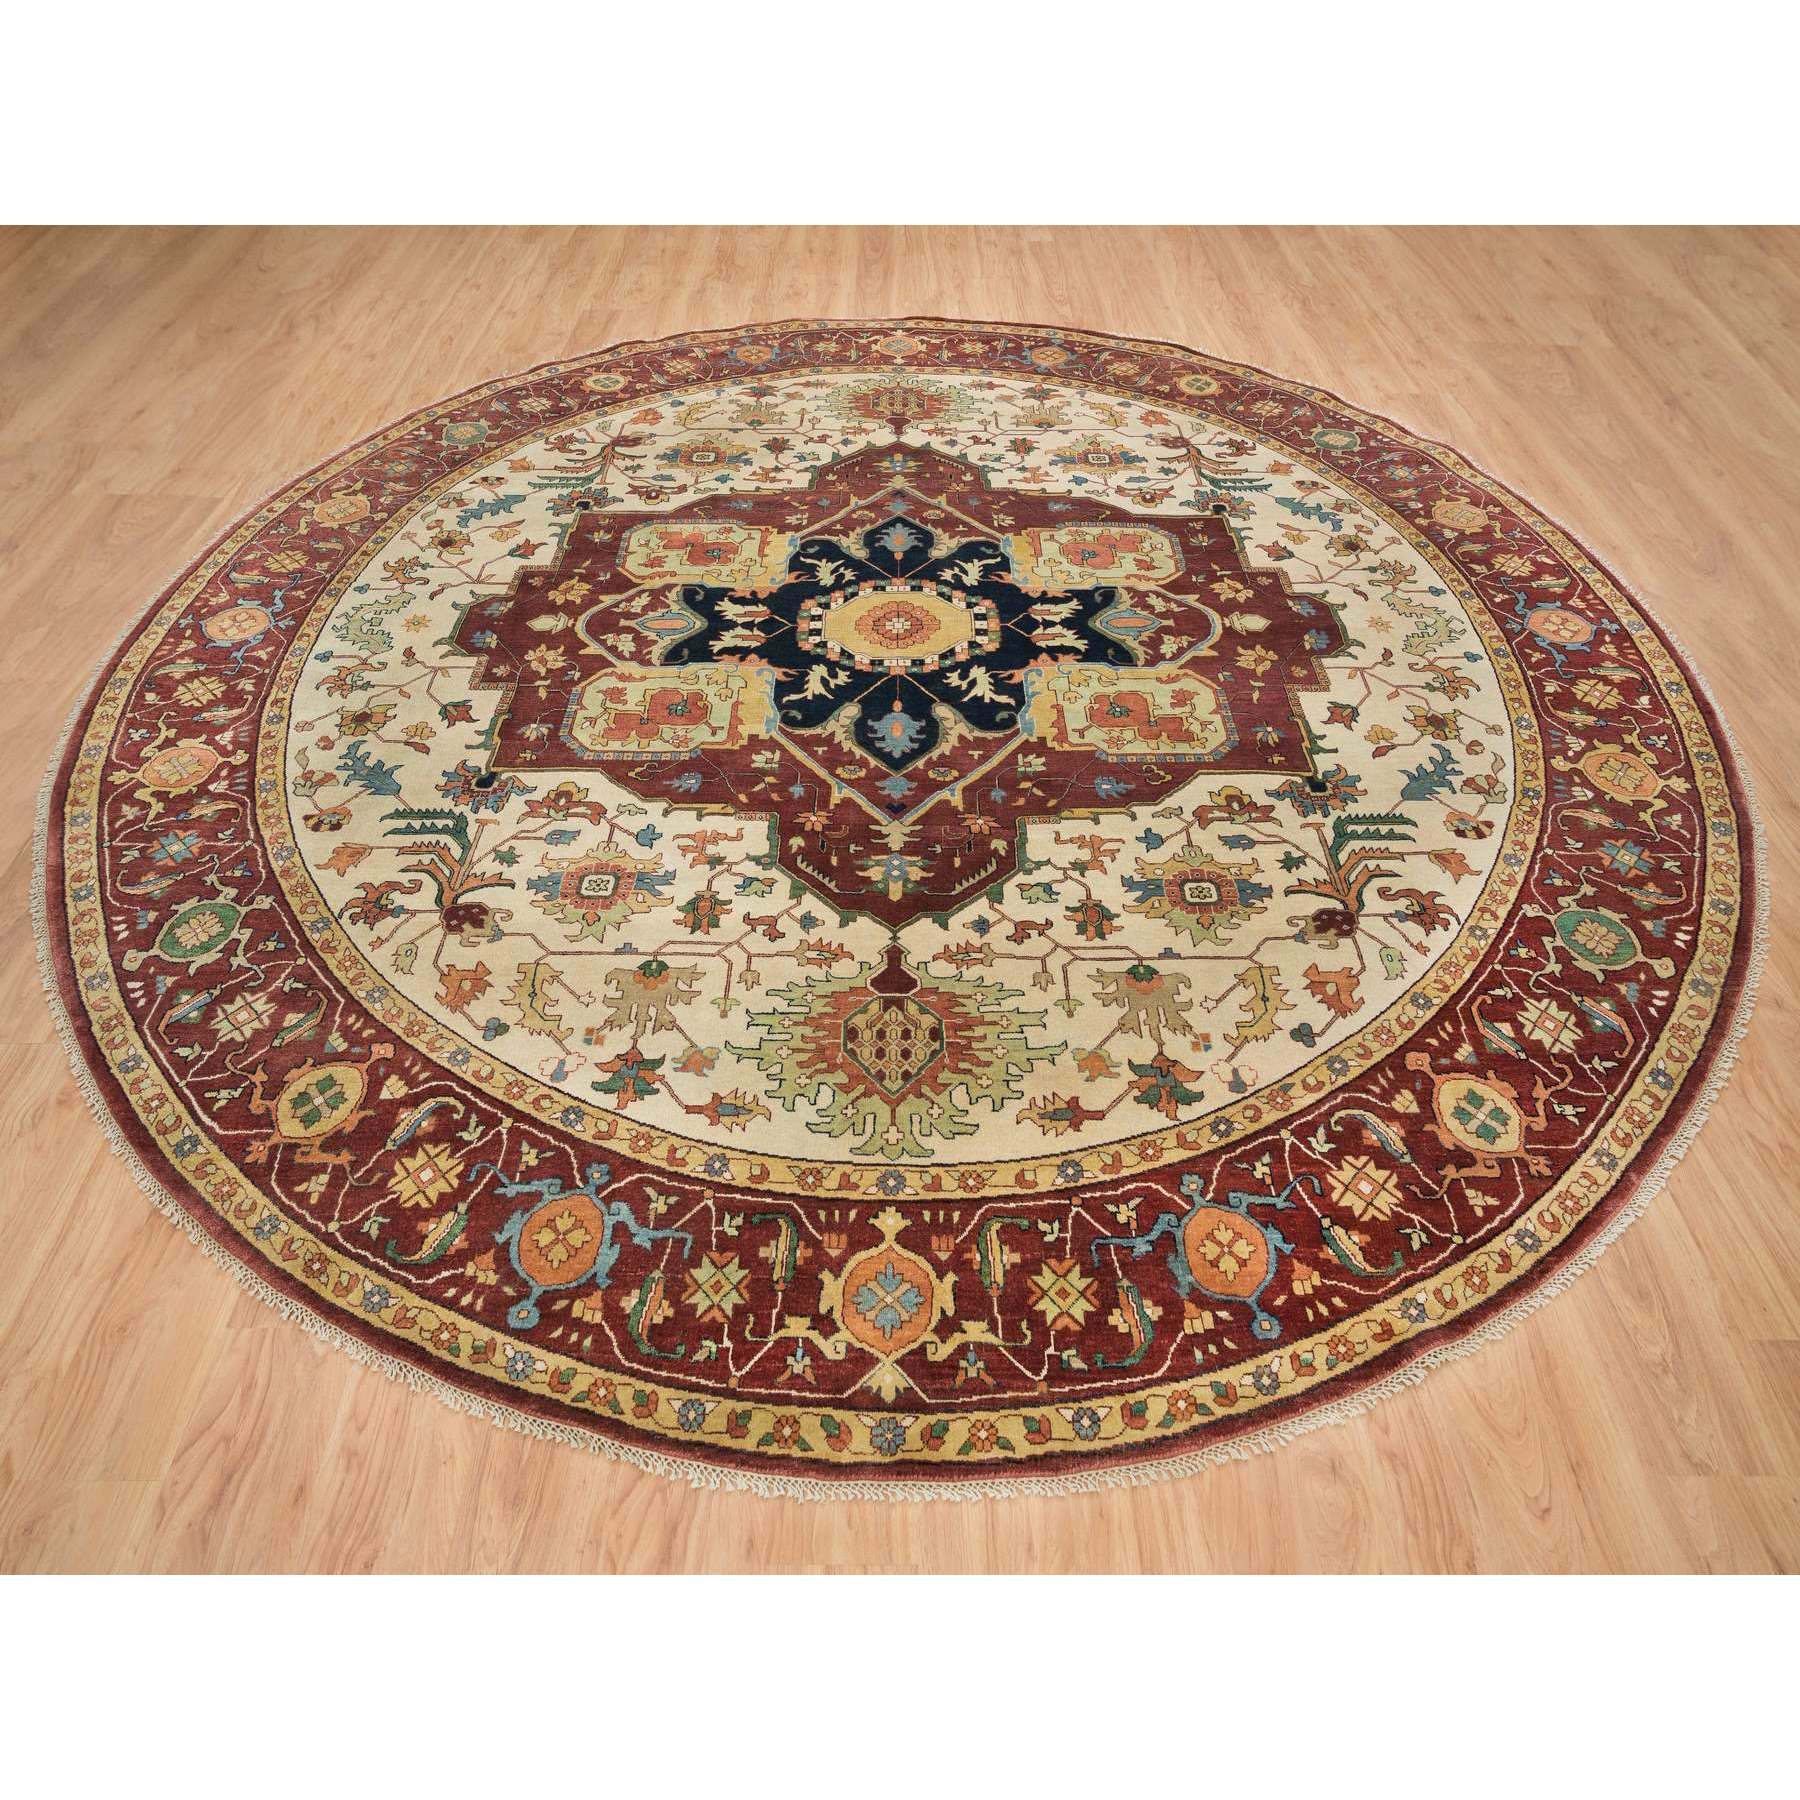  Wool Hand-Knotted Area Rug 12'3